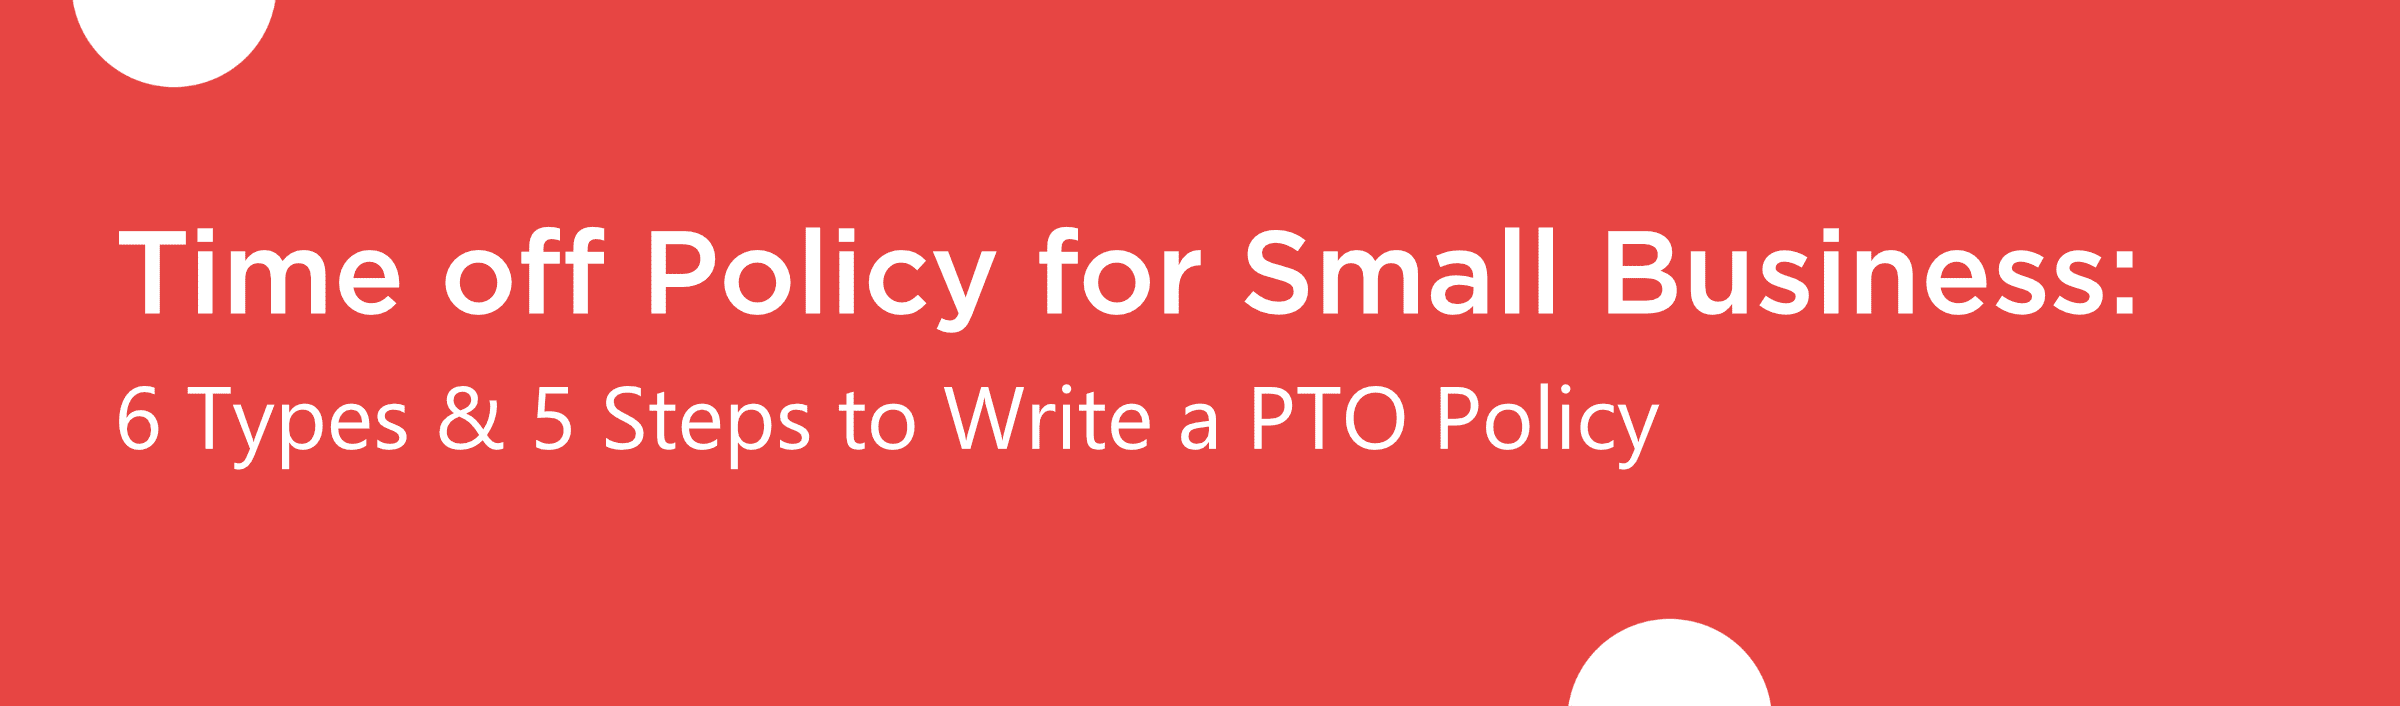 Time off Policy for Small Business: 6 Types & 5 Steps to Write a PTO Policy